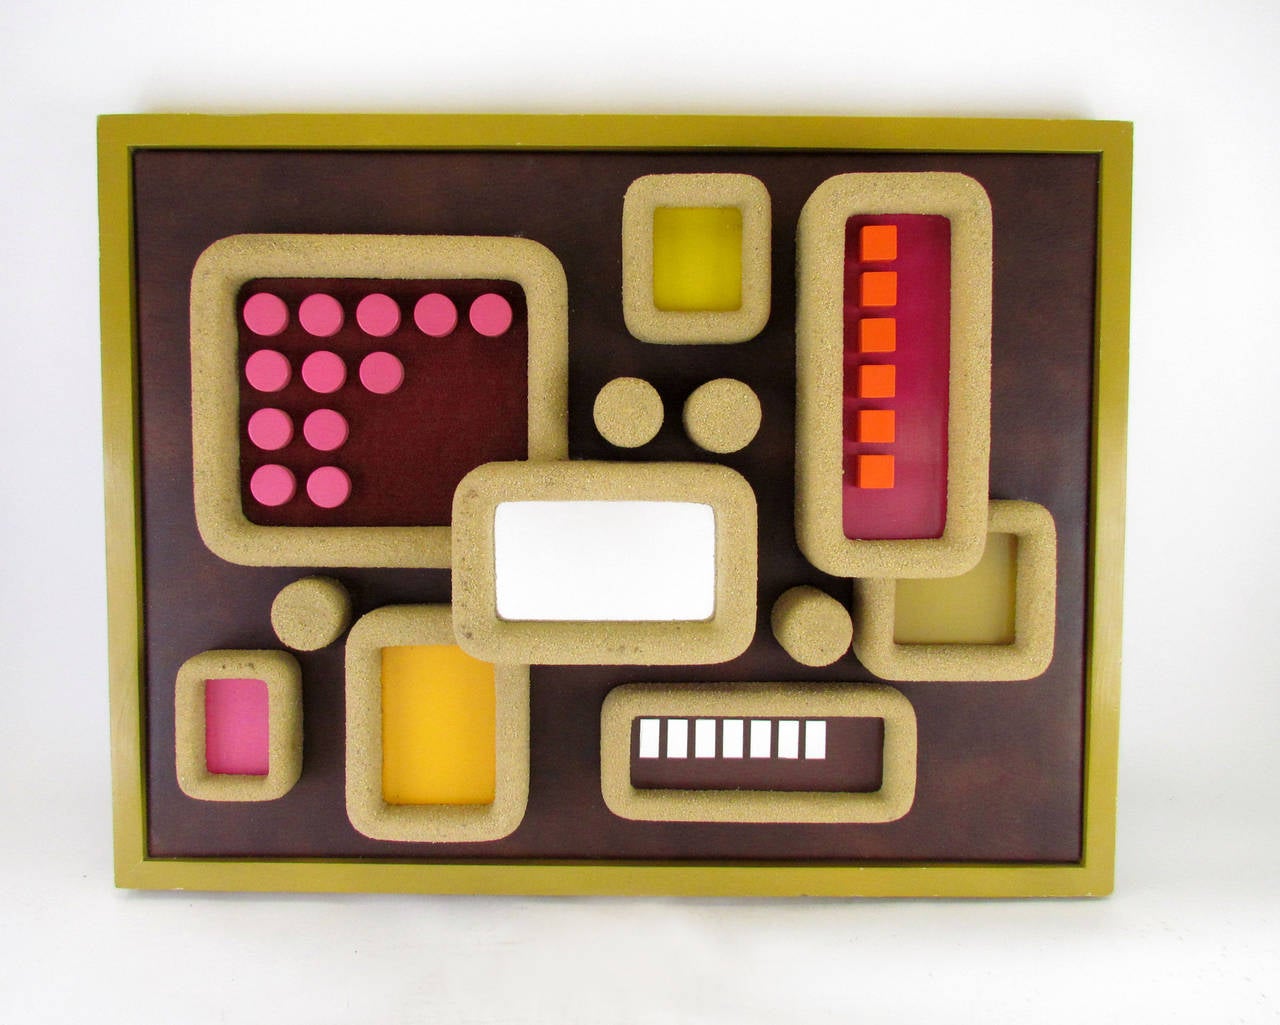 Mixed-media abstract construction by listed Pennsylvania artist Frank Ponstingl (also known as Franz Jozef), dated 1981. Colorful modular assemblage of sand-form units with painted elements and applied mirrors.